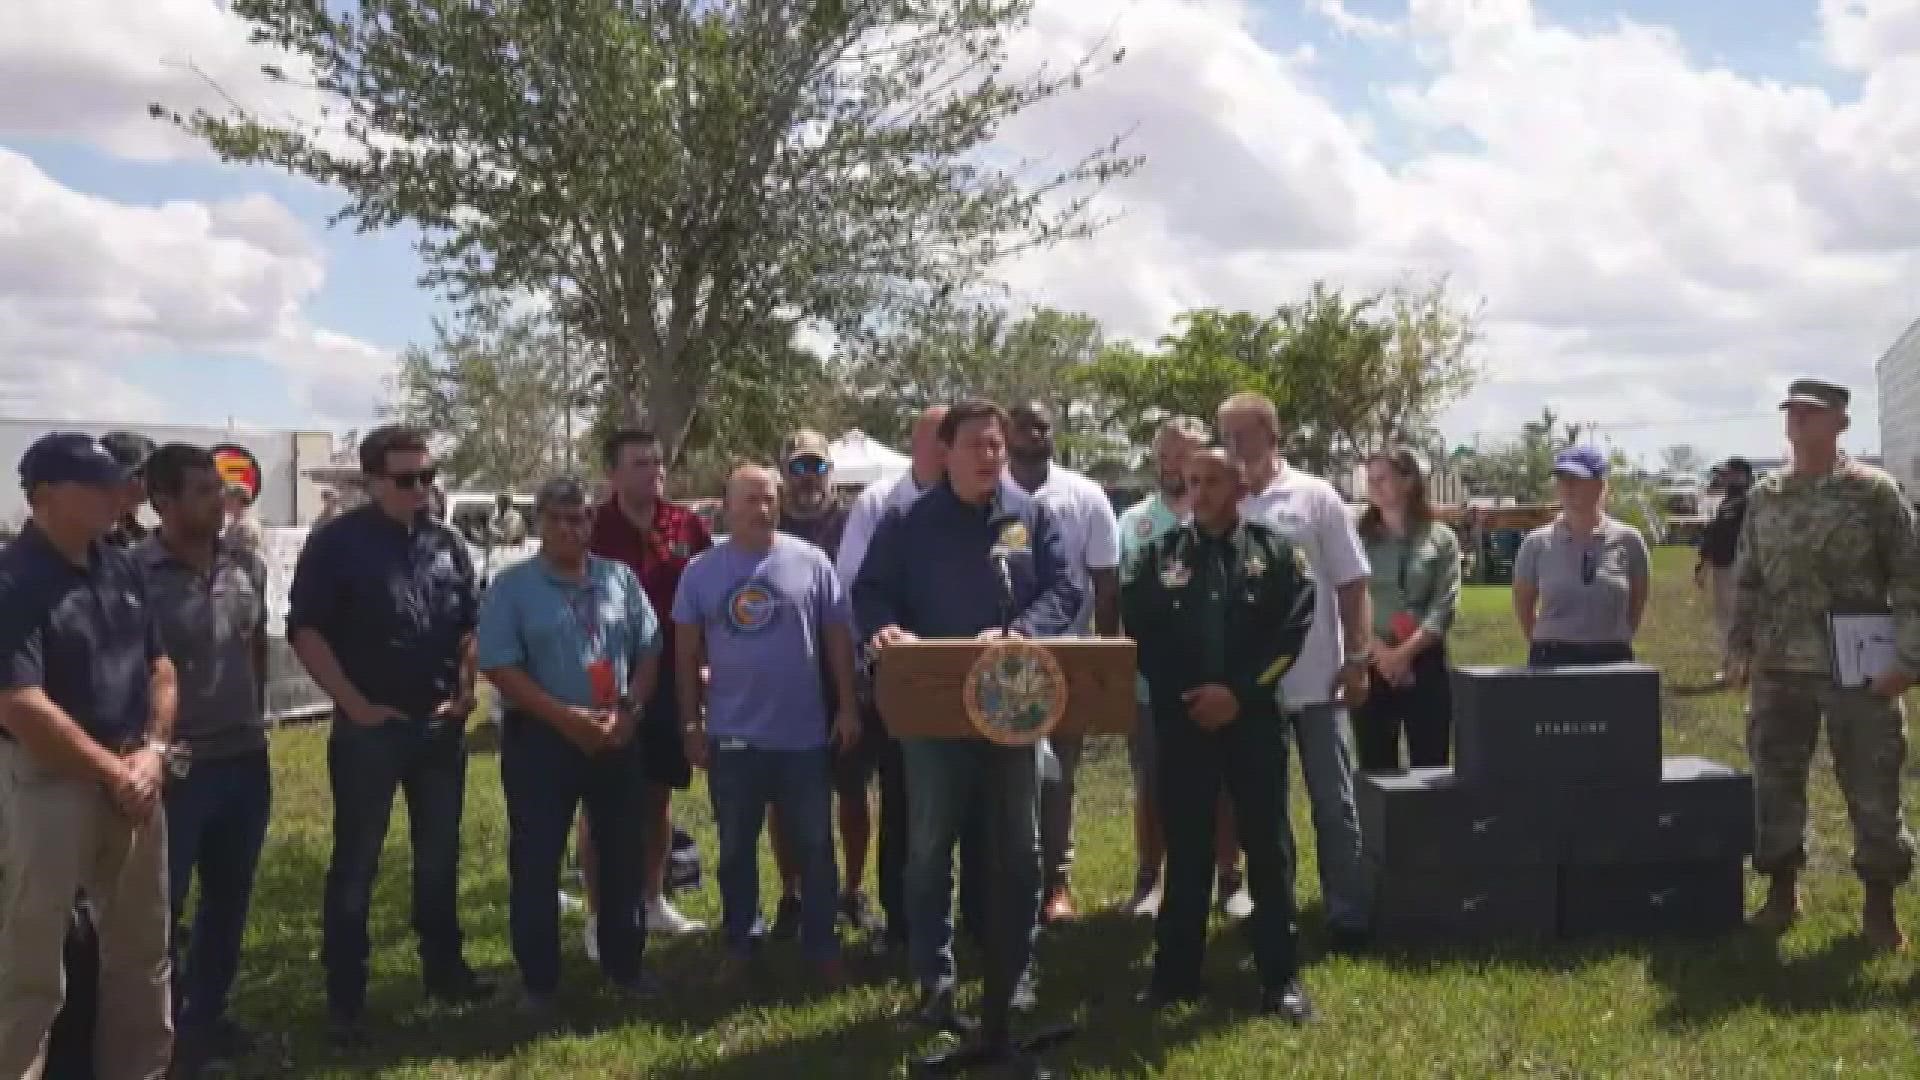 The governor said the Starlink units will be placed within different southwest Florida counties and other areas impacted by Hurricane Ian.